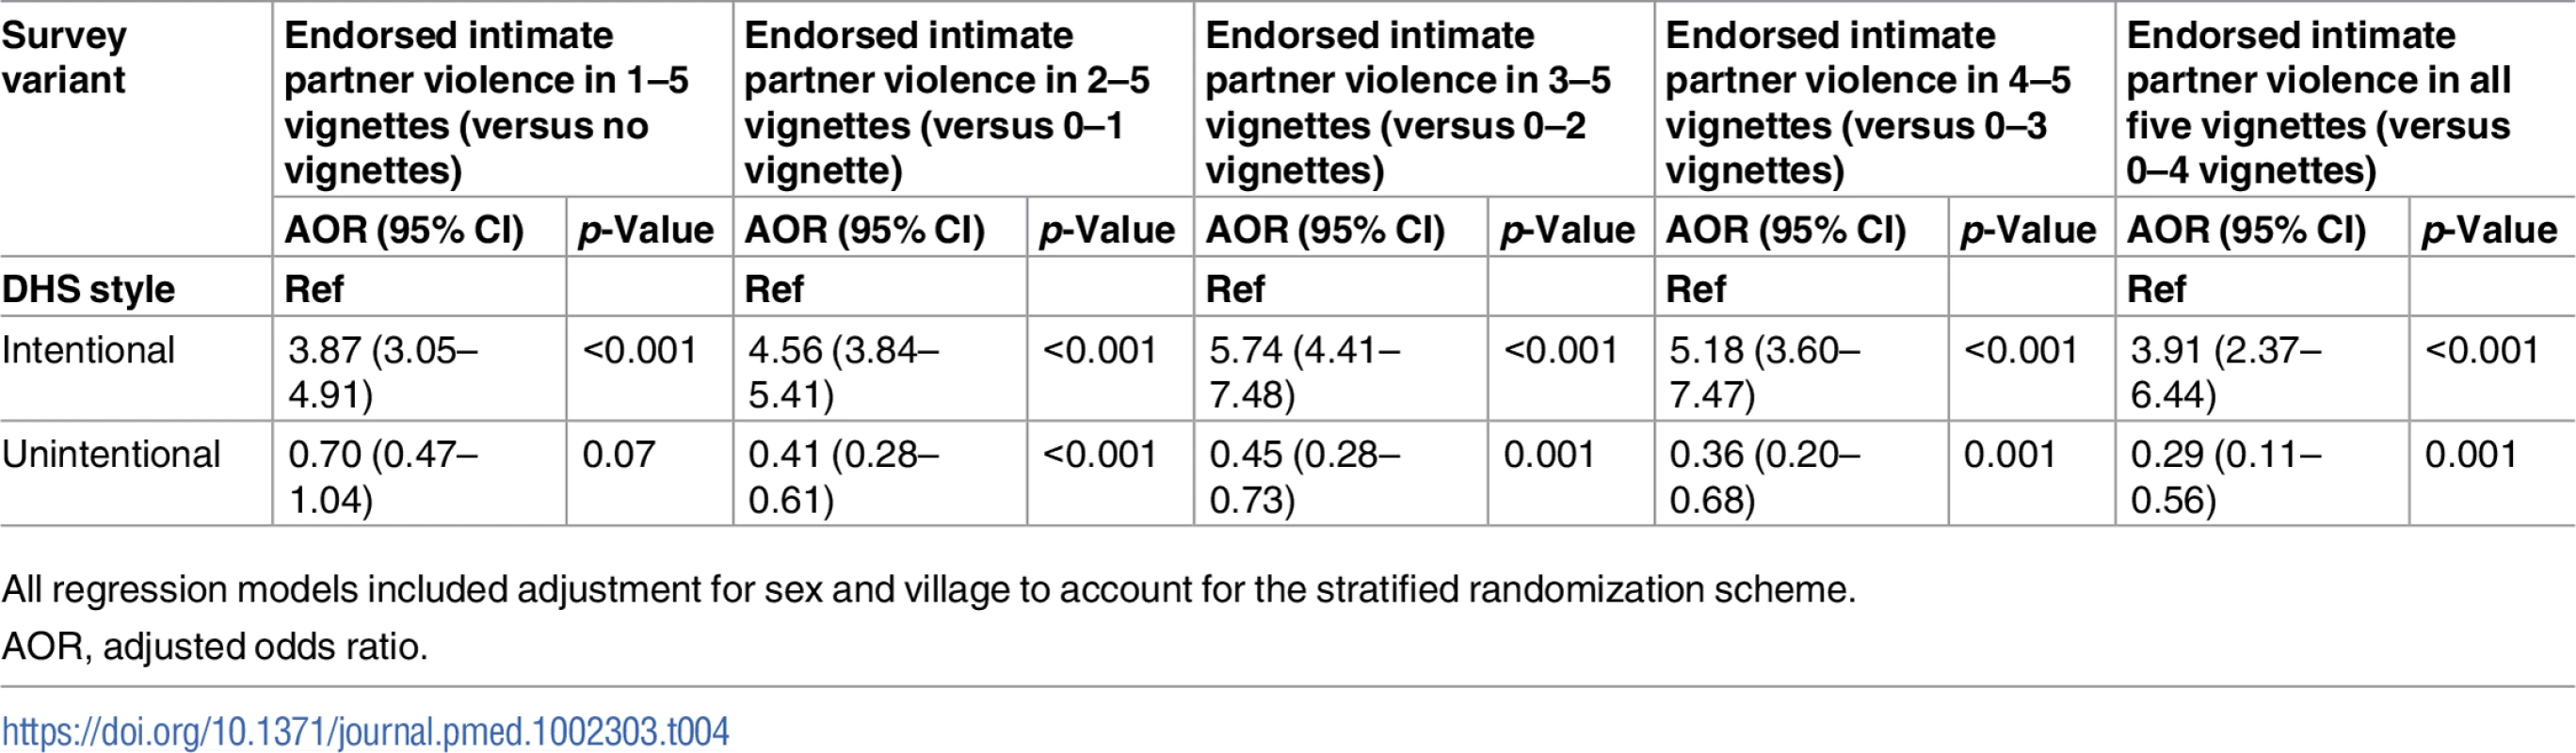 Personal beliefs about the acceptability of intimate partner violence, adjusted estimates by survey condition, using partial proportional odds regression (<i>n =</i> 1,334).